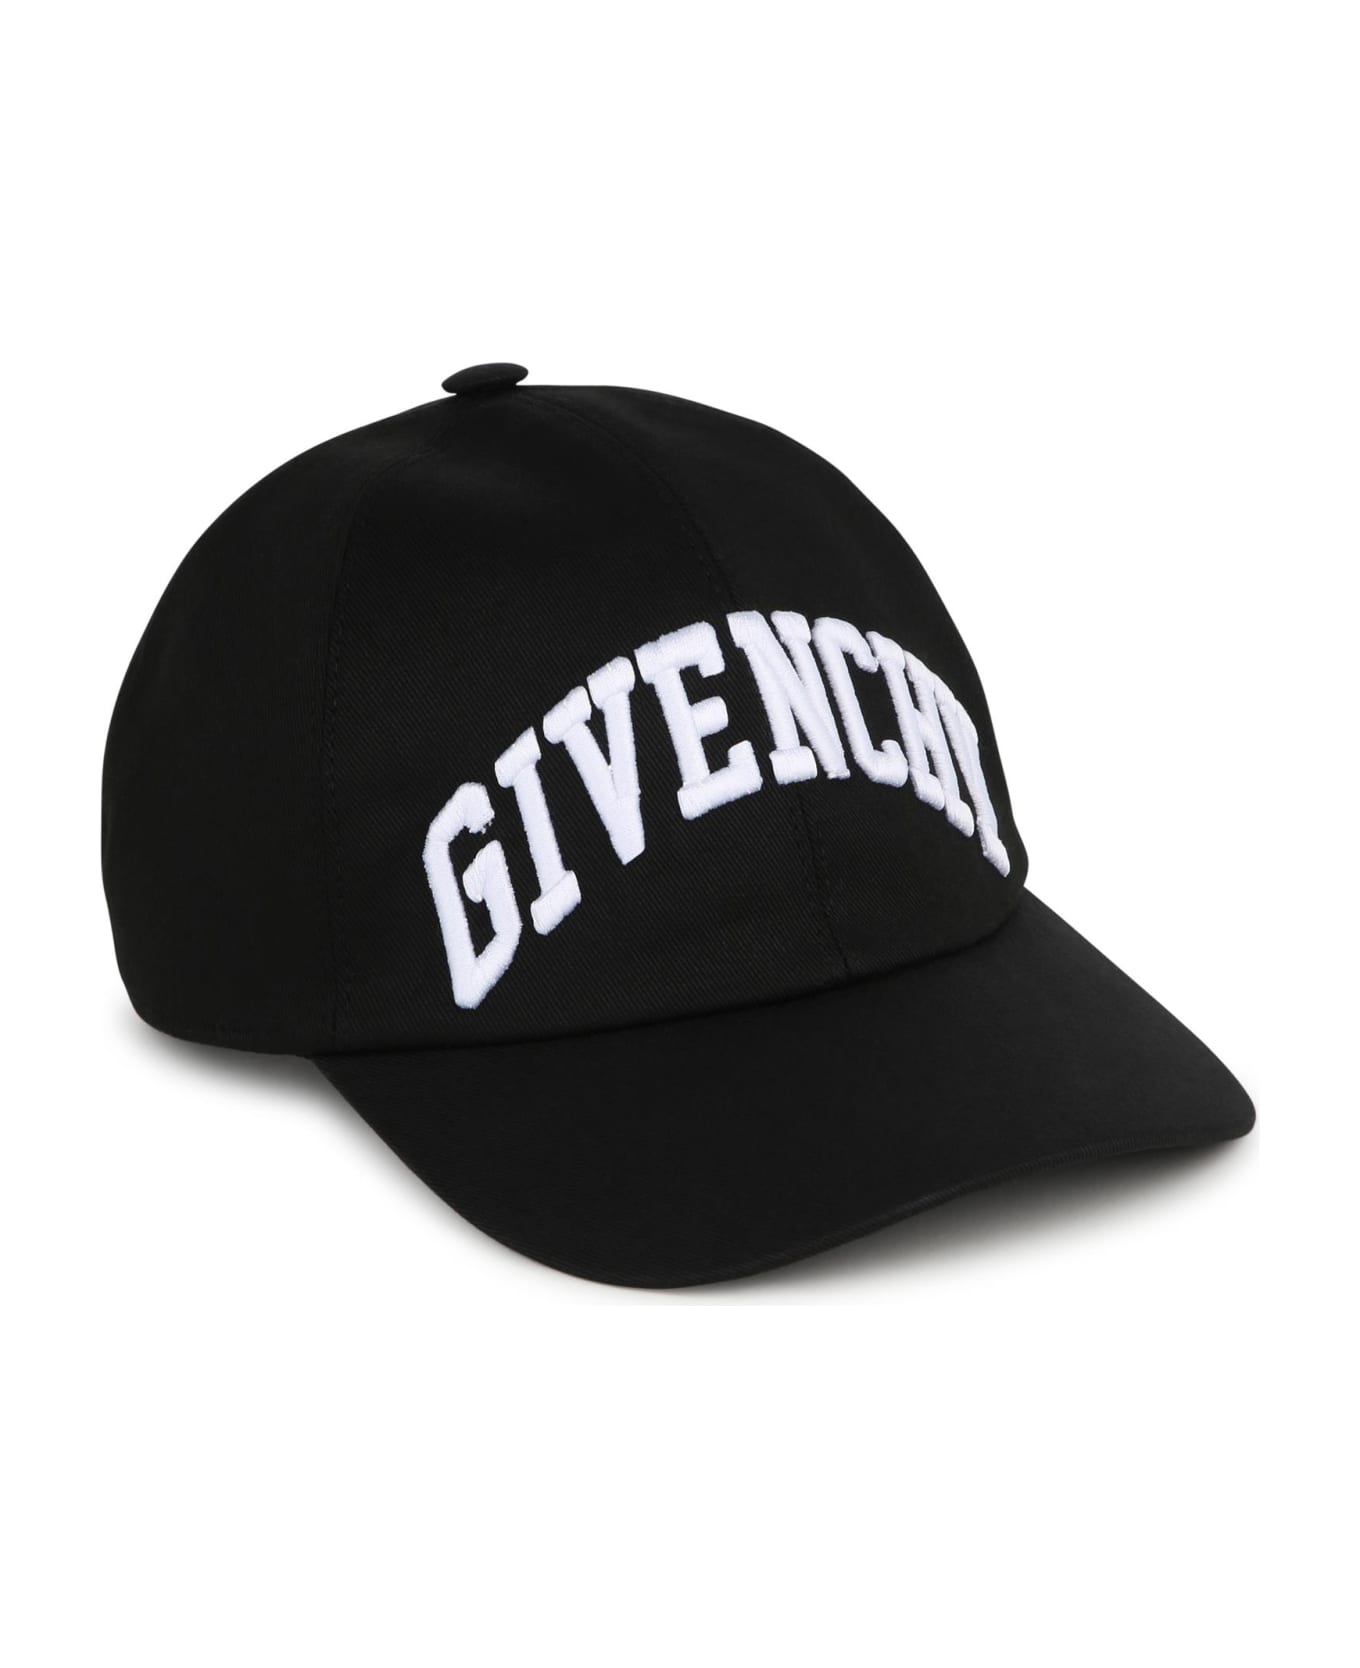 Givenchy Baseball Hat With Embroidery - Black